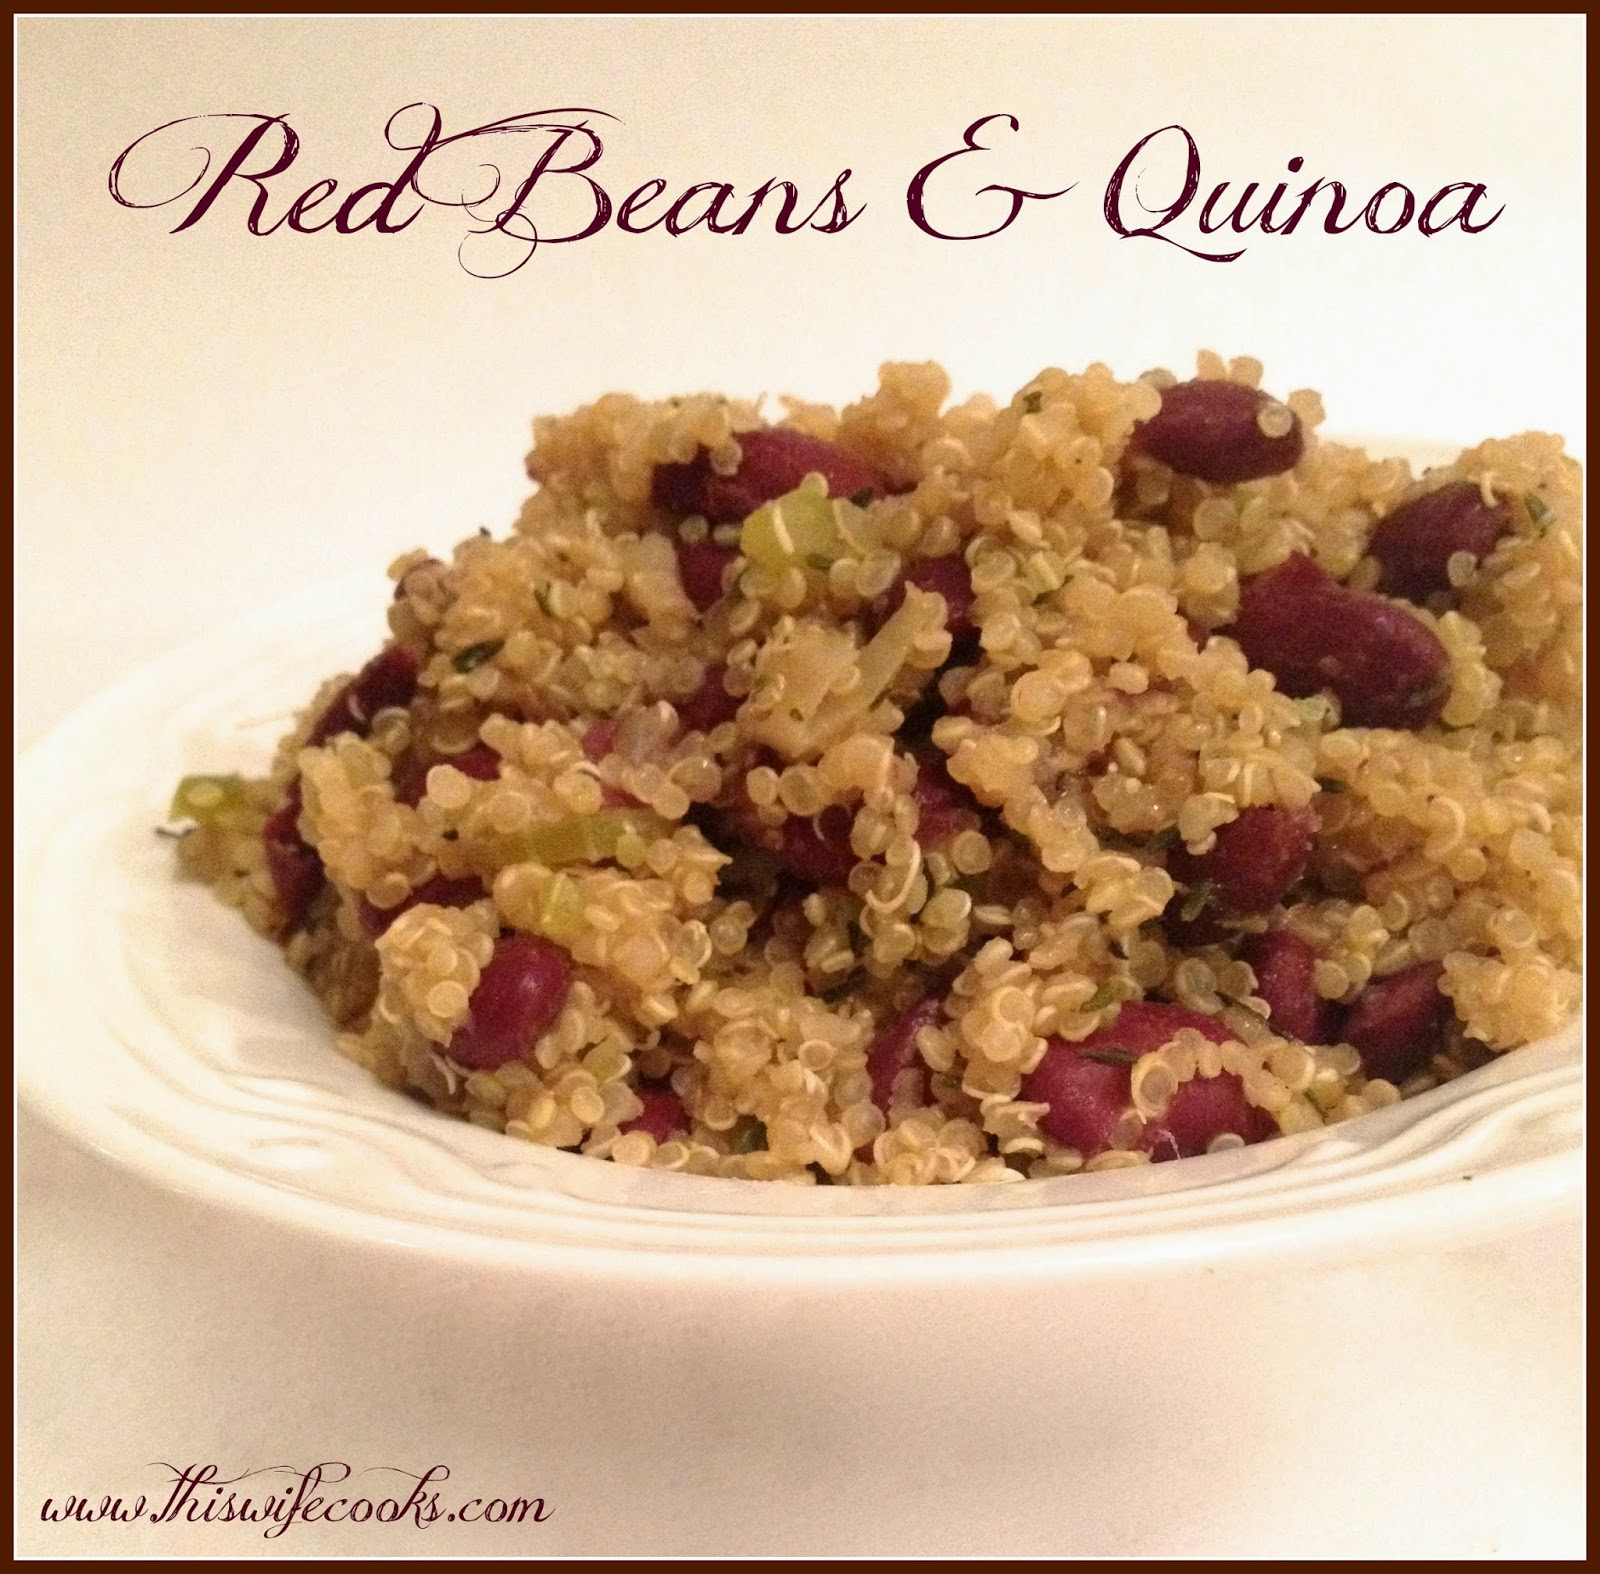 Vegan Red Beans and Quinoa - Hearty and healthy, Southern-style comfort food high in protein, gluten-free and vegan! Ready to serve in just 20 minutes!